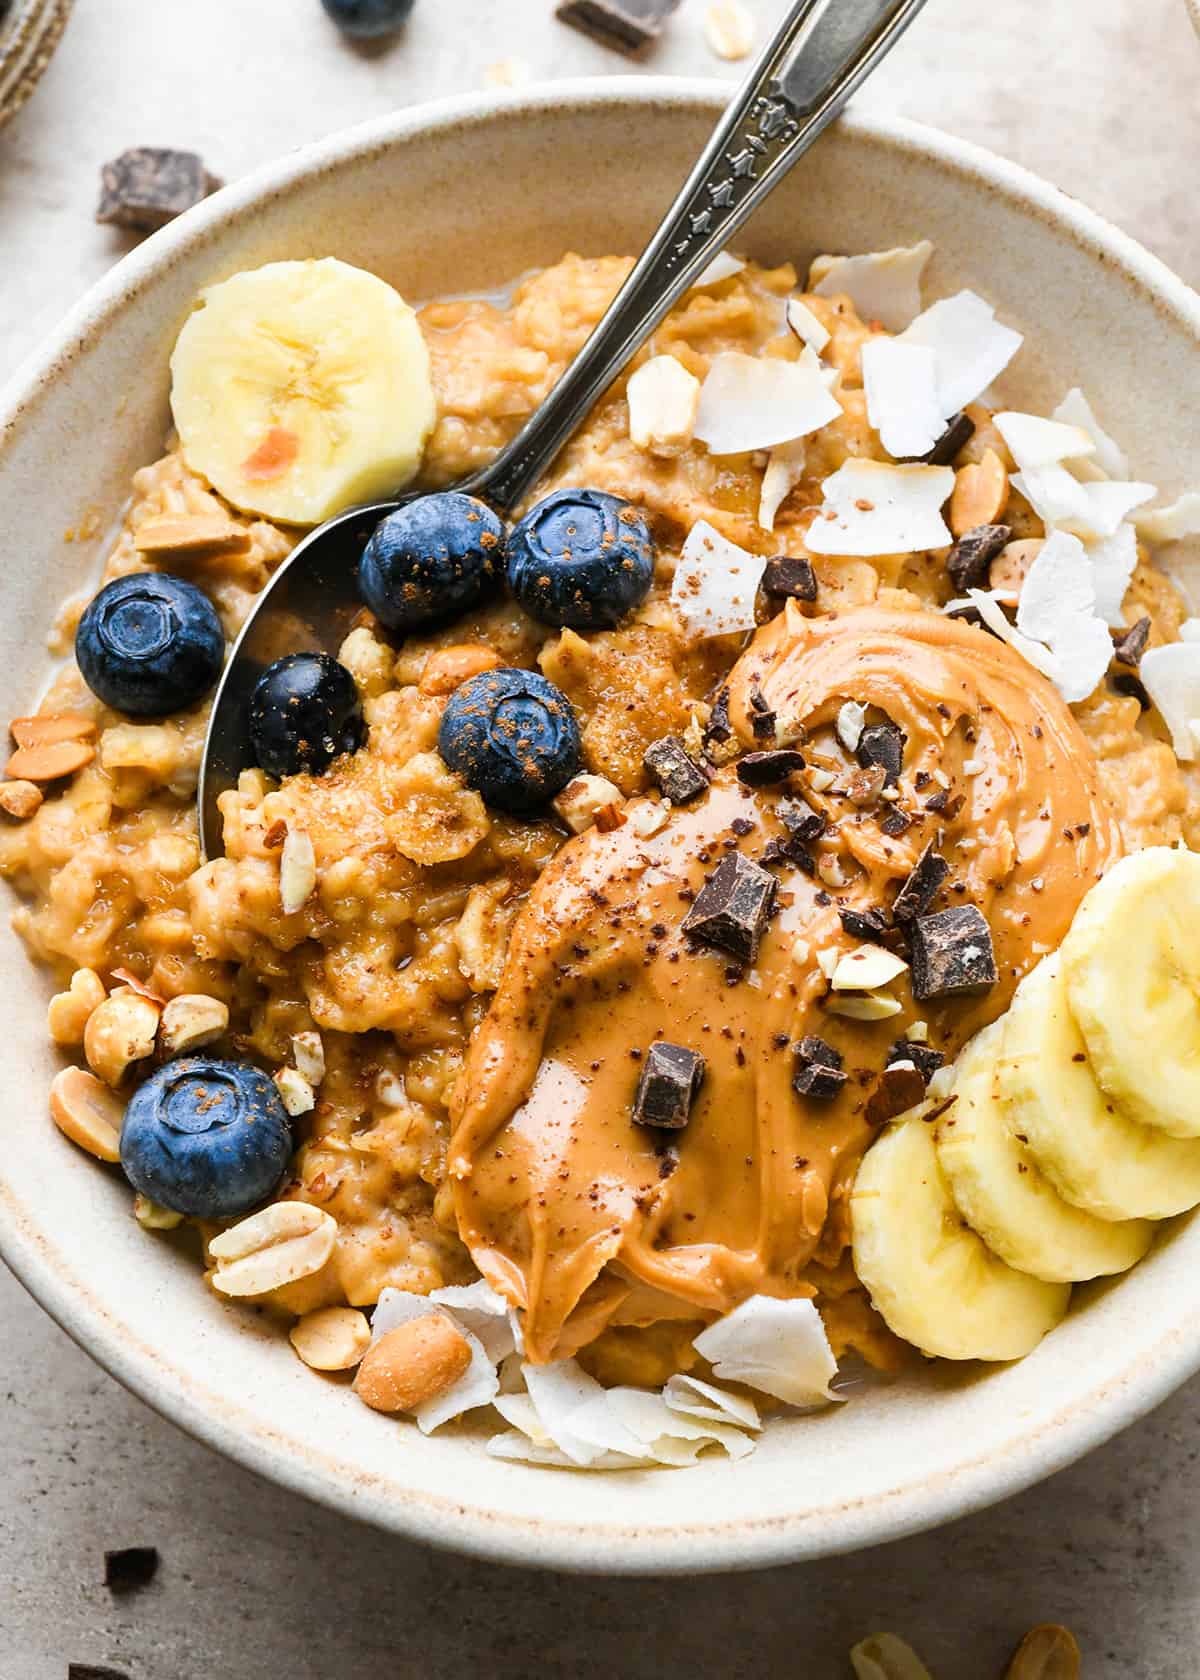 a bowl of Peanut Butter Oatmeal topped with blueberries, bananas, peanut butter, chocolate and coconut